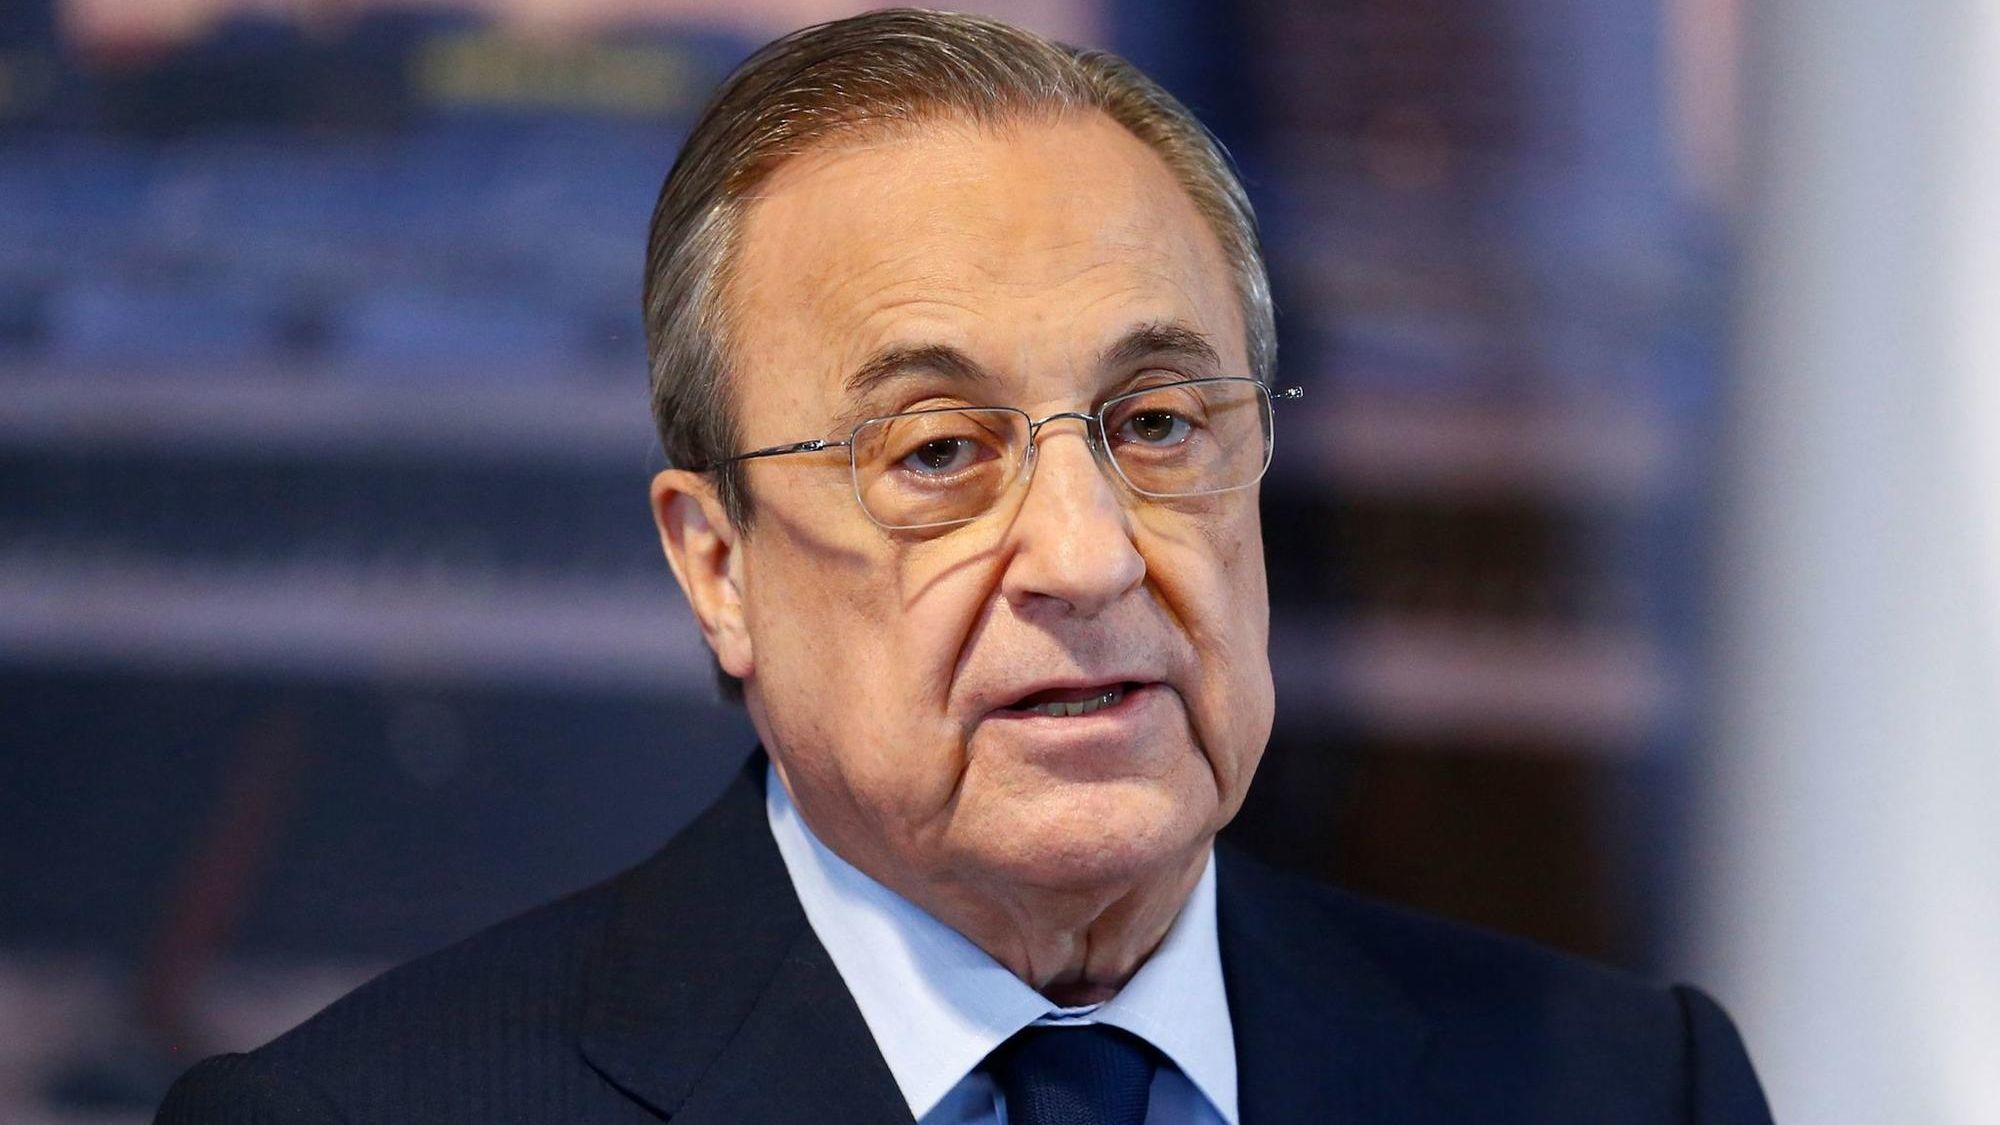 Real Madrid president Florentino Perez against La Liga plan to play game in U.S.: ‘We are vehemently against it’